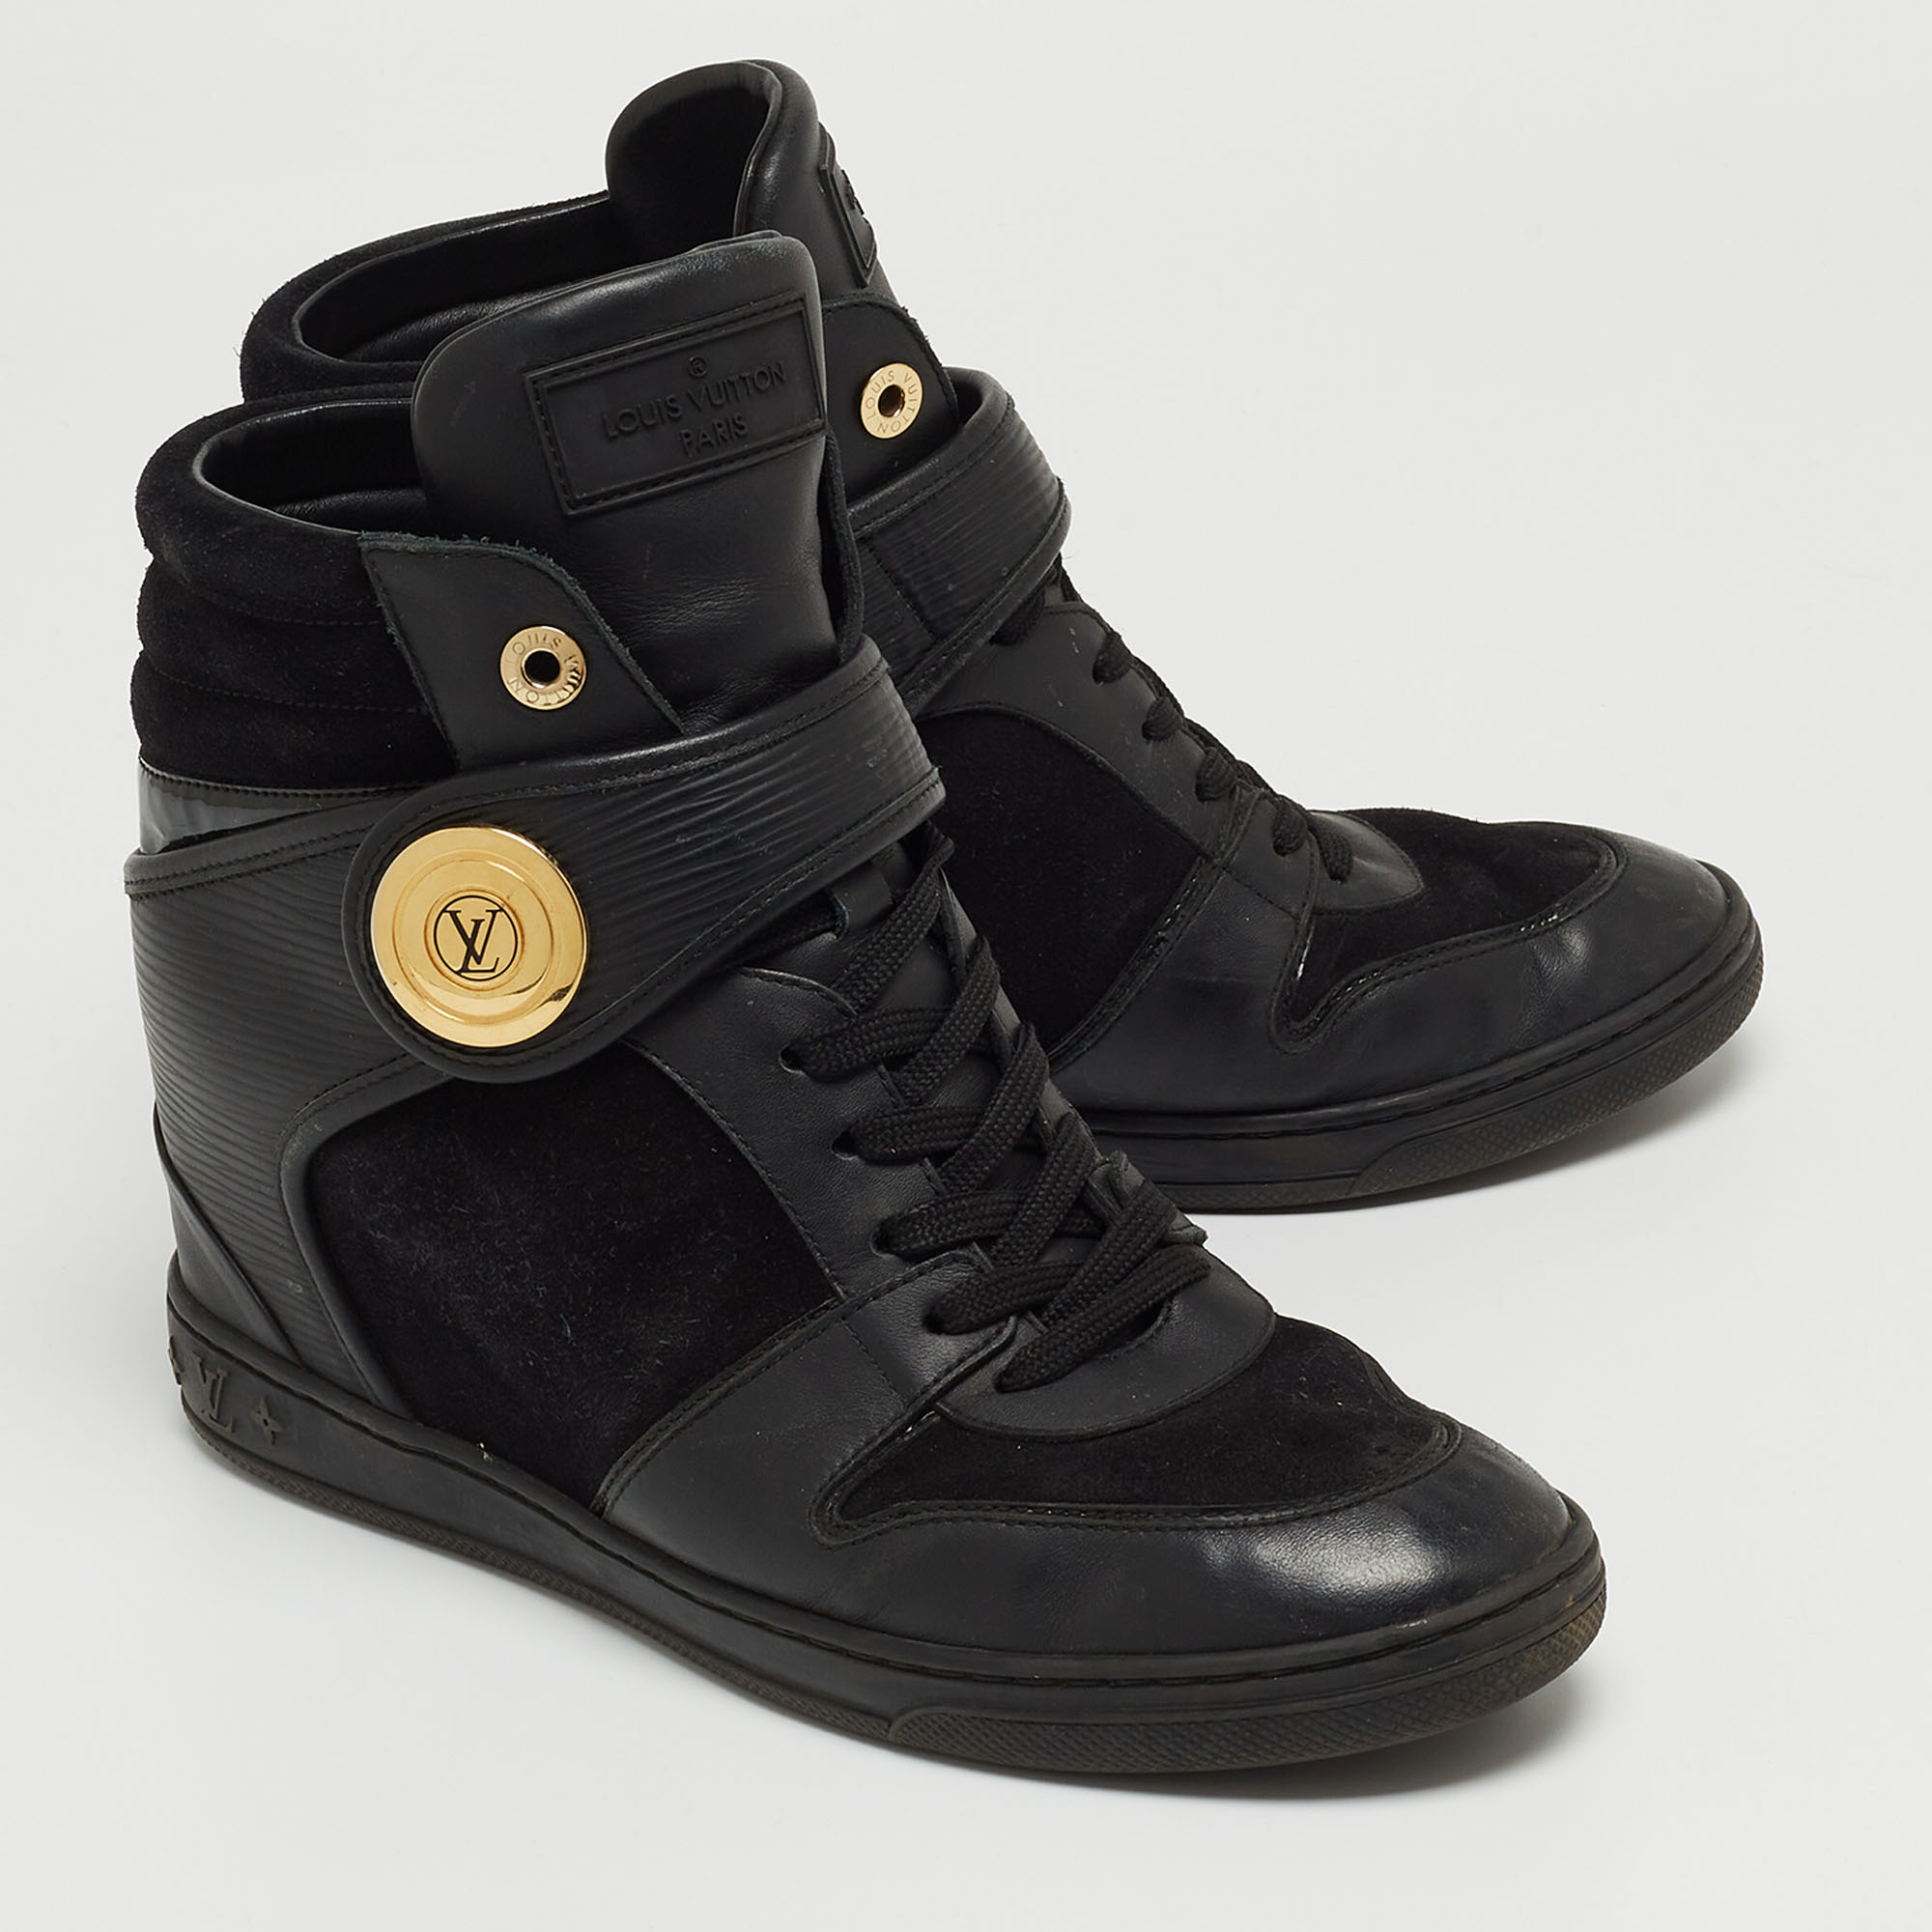 Louis Vuitton Black Epi Leather And Suede High Top Sneakers Size 40